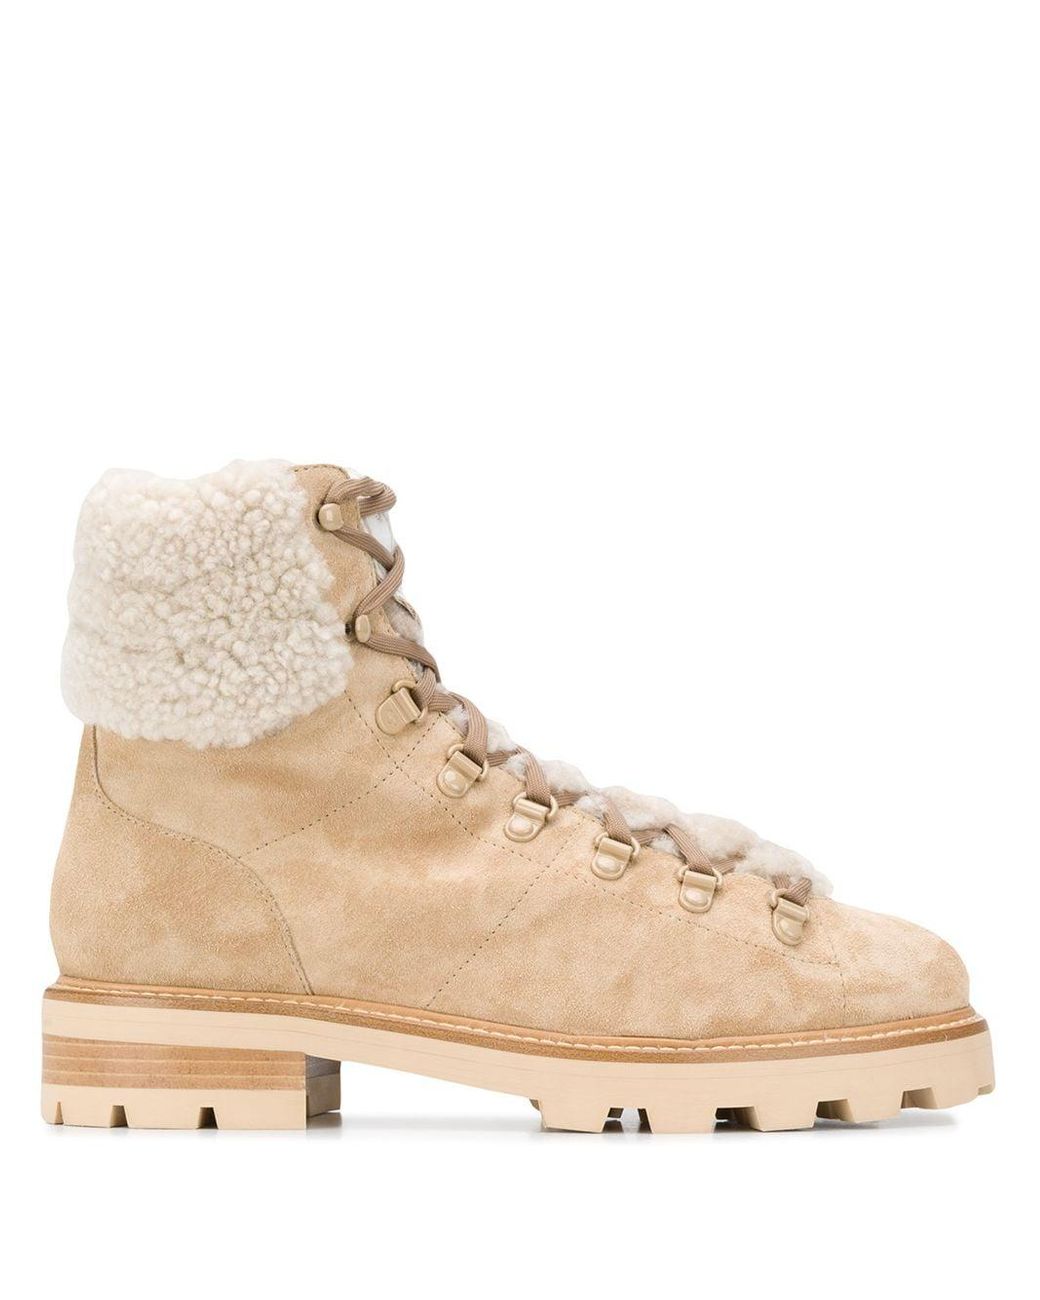 Jimmy Choo Suede Eshe Shearling Hiking Boots in Natural - Lyst